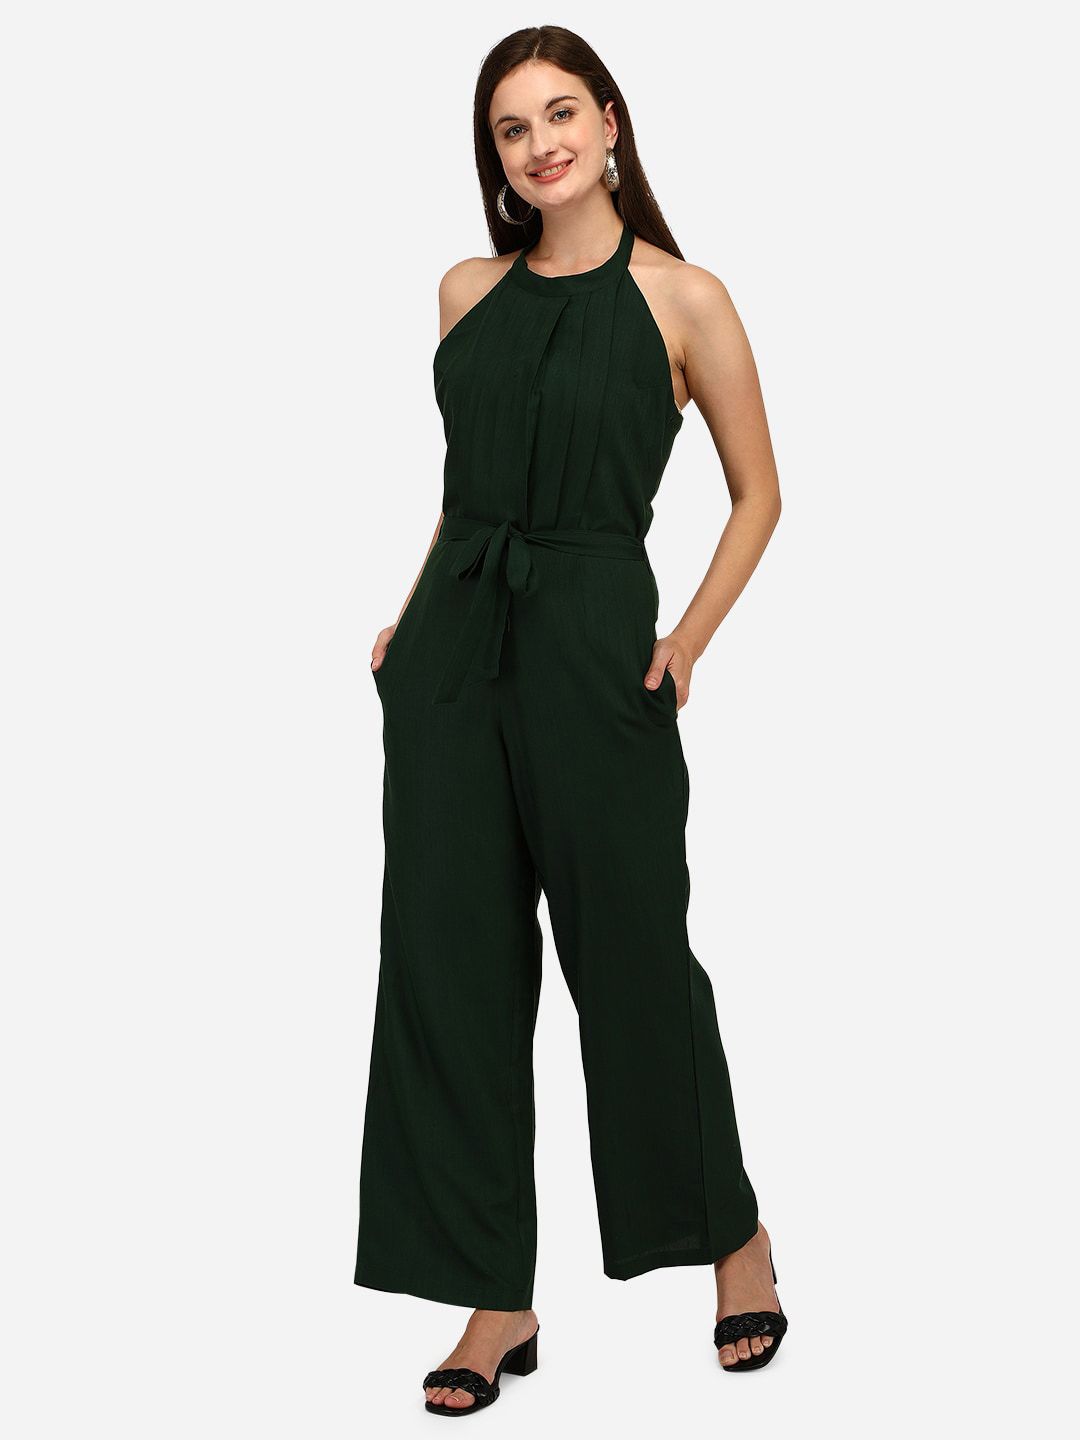 Yuvraah Green Solid Halter Neck Basic Jumpsuit With Waist Tie-Ups Price in India